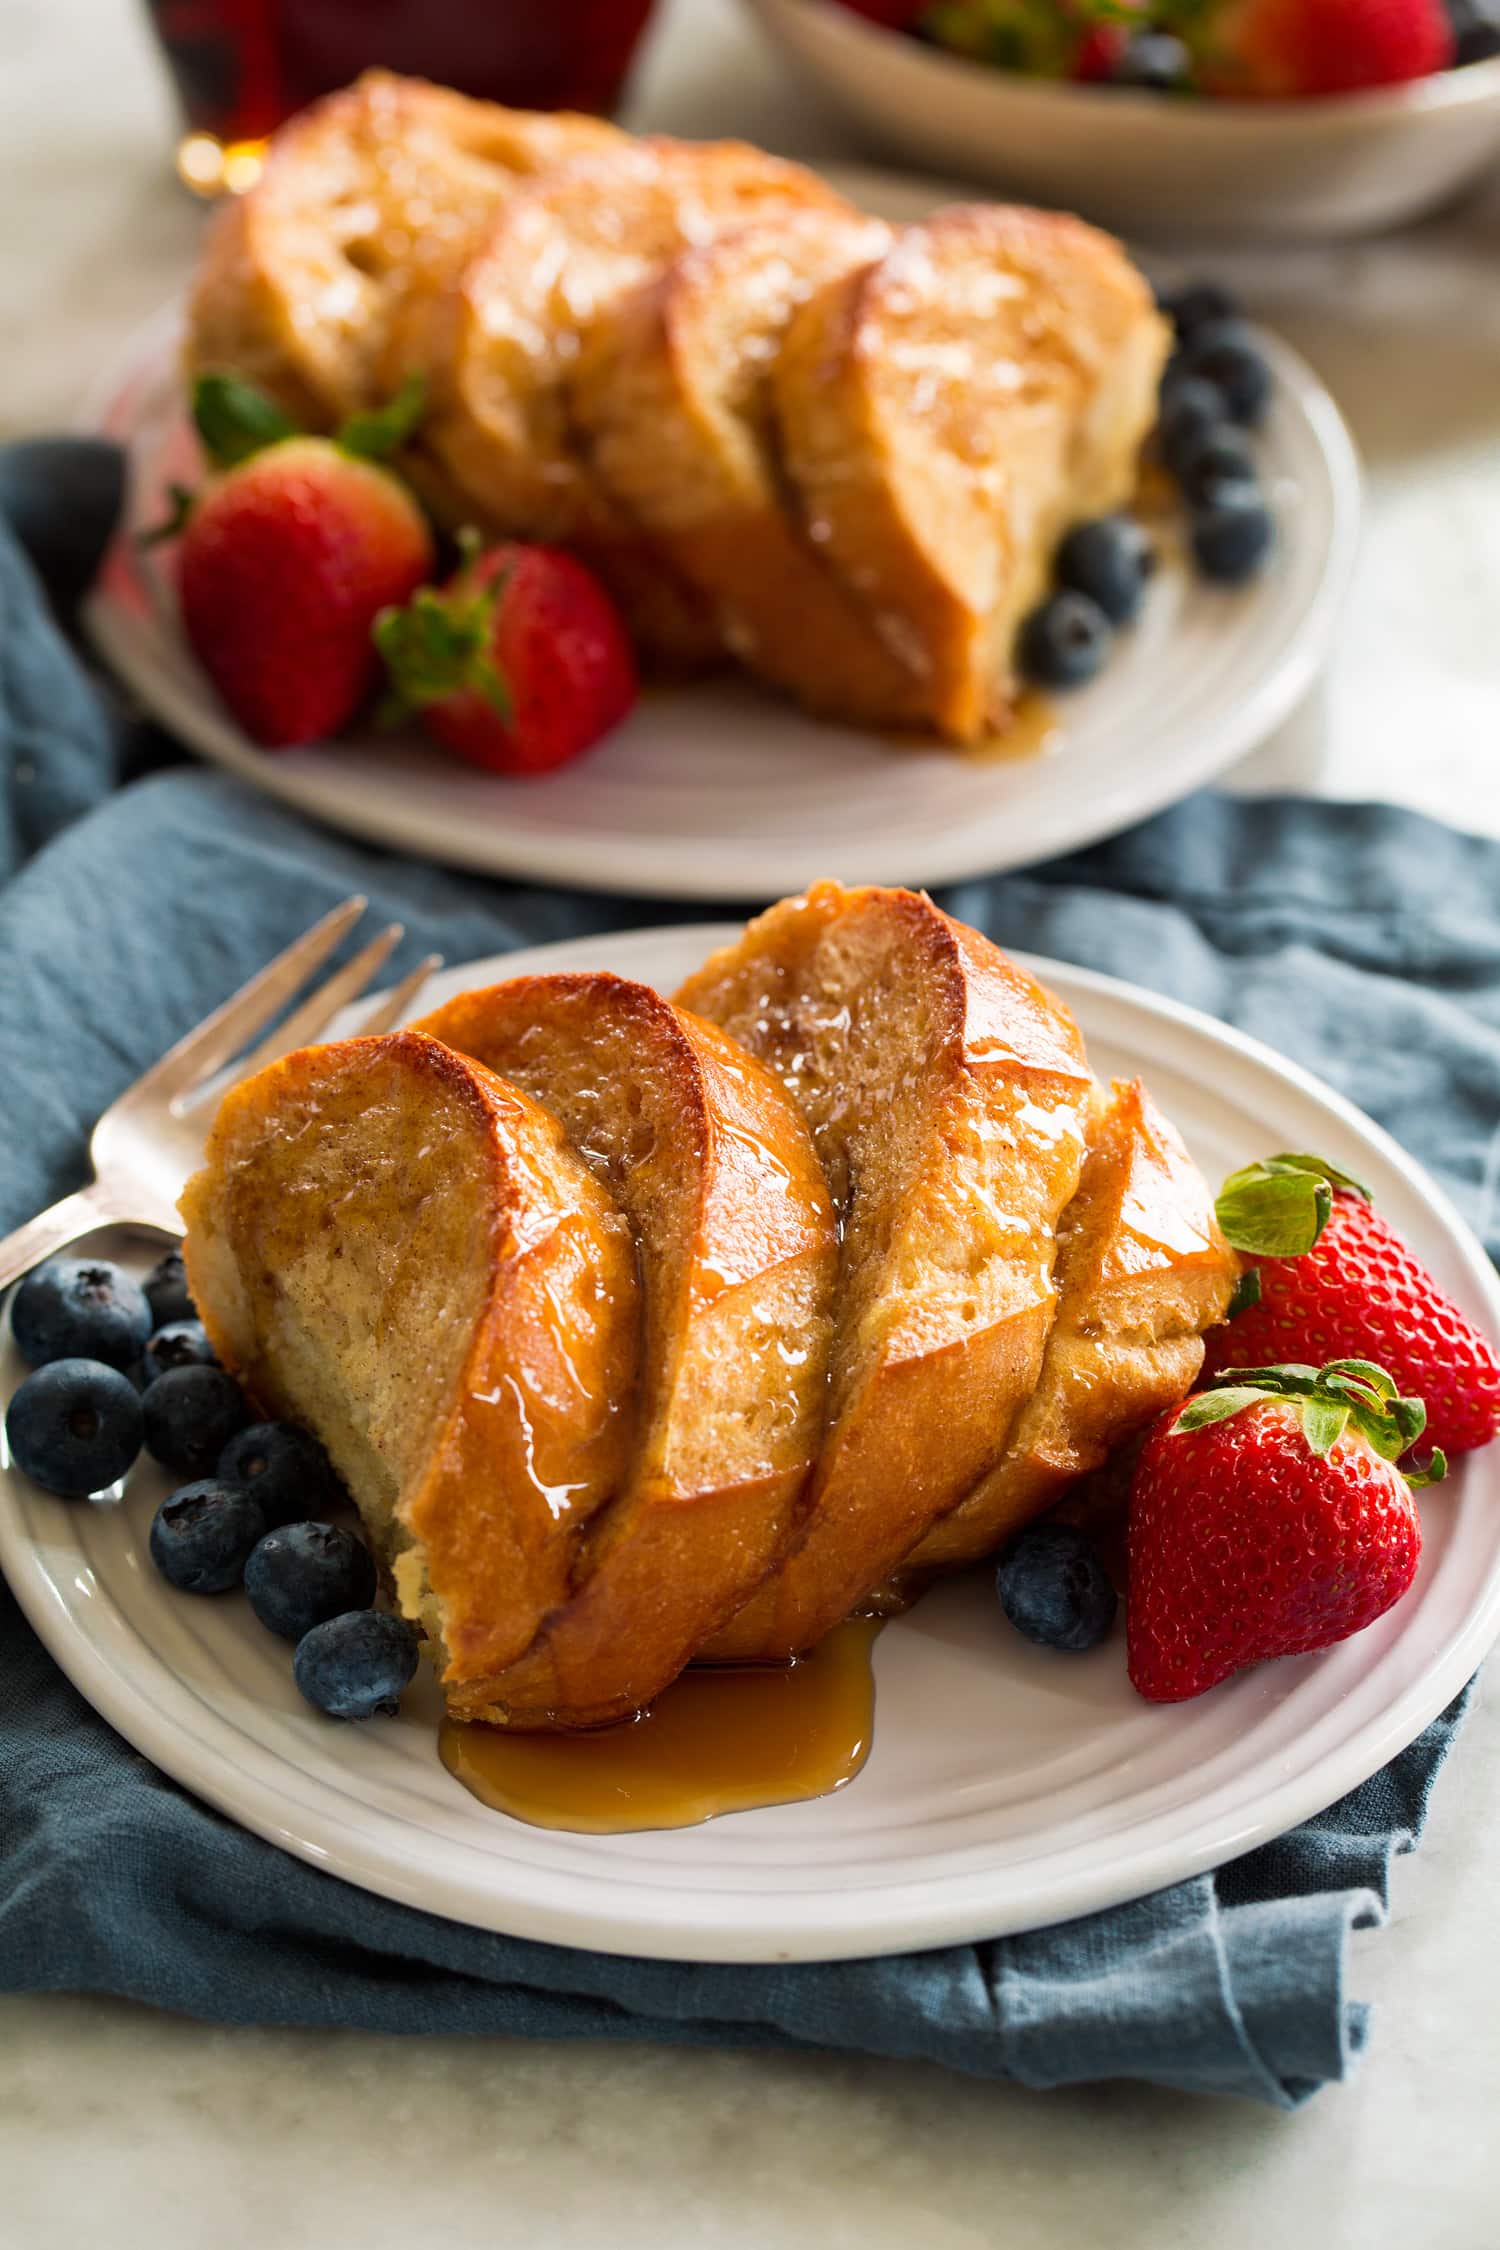 Baked french toast cut into square servings.